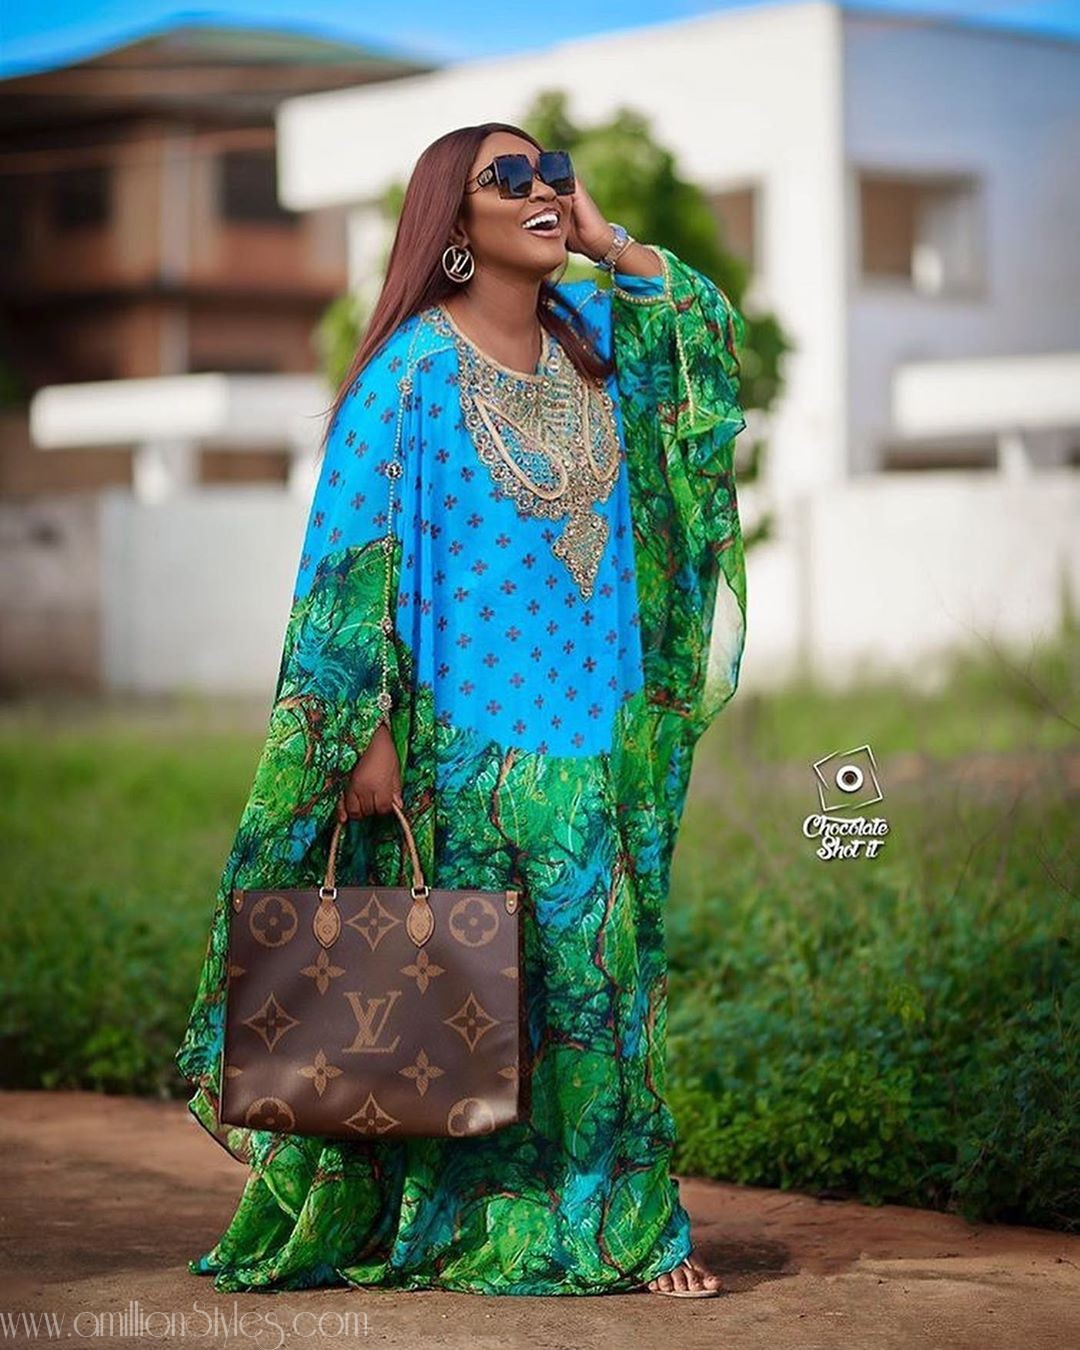 Jackie Appiah Gives Off Rich Aunty Vibes In Green Embellished Gown